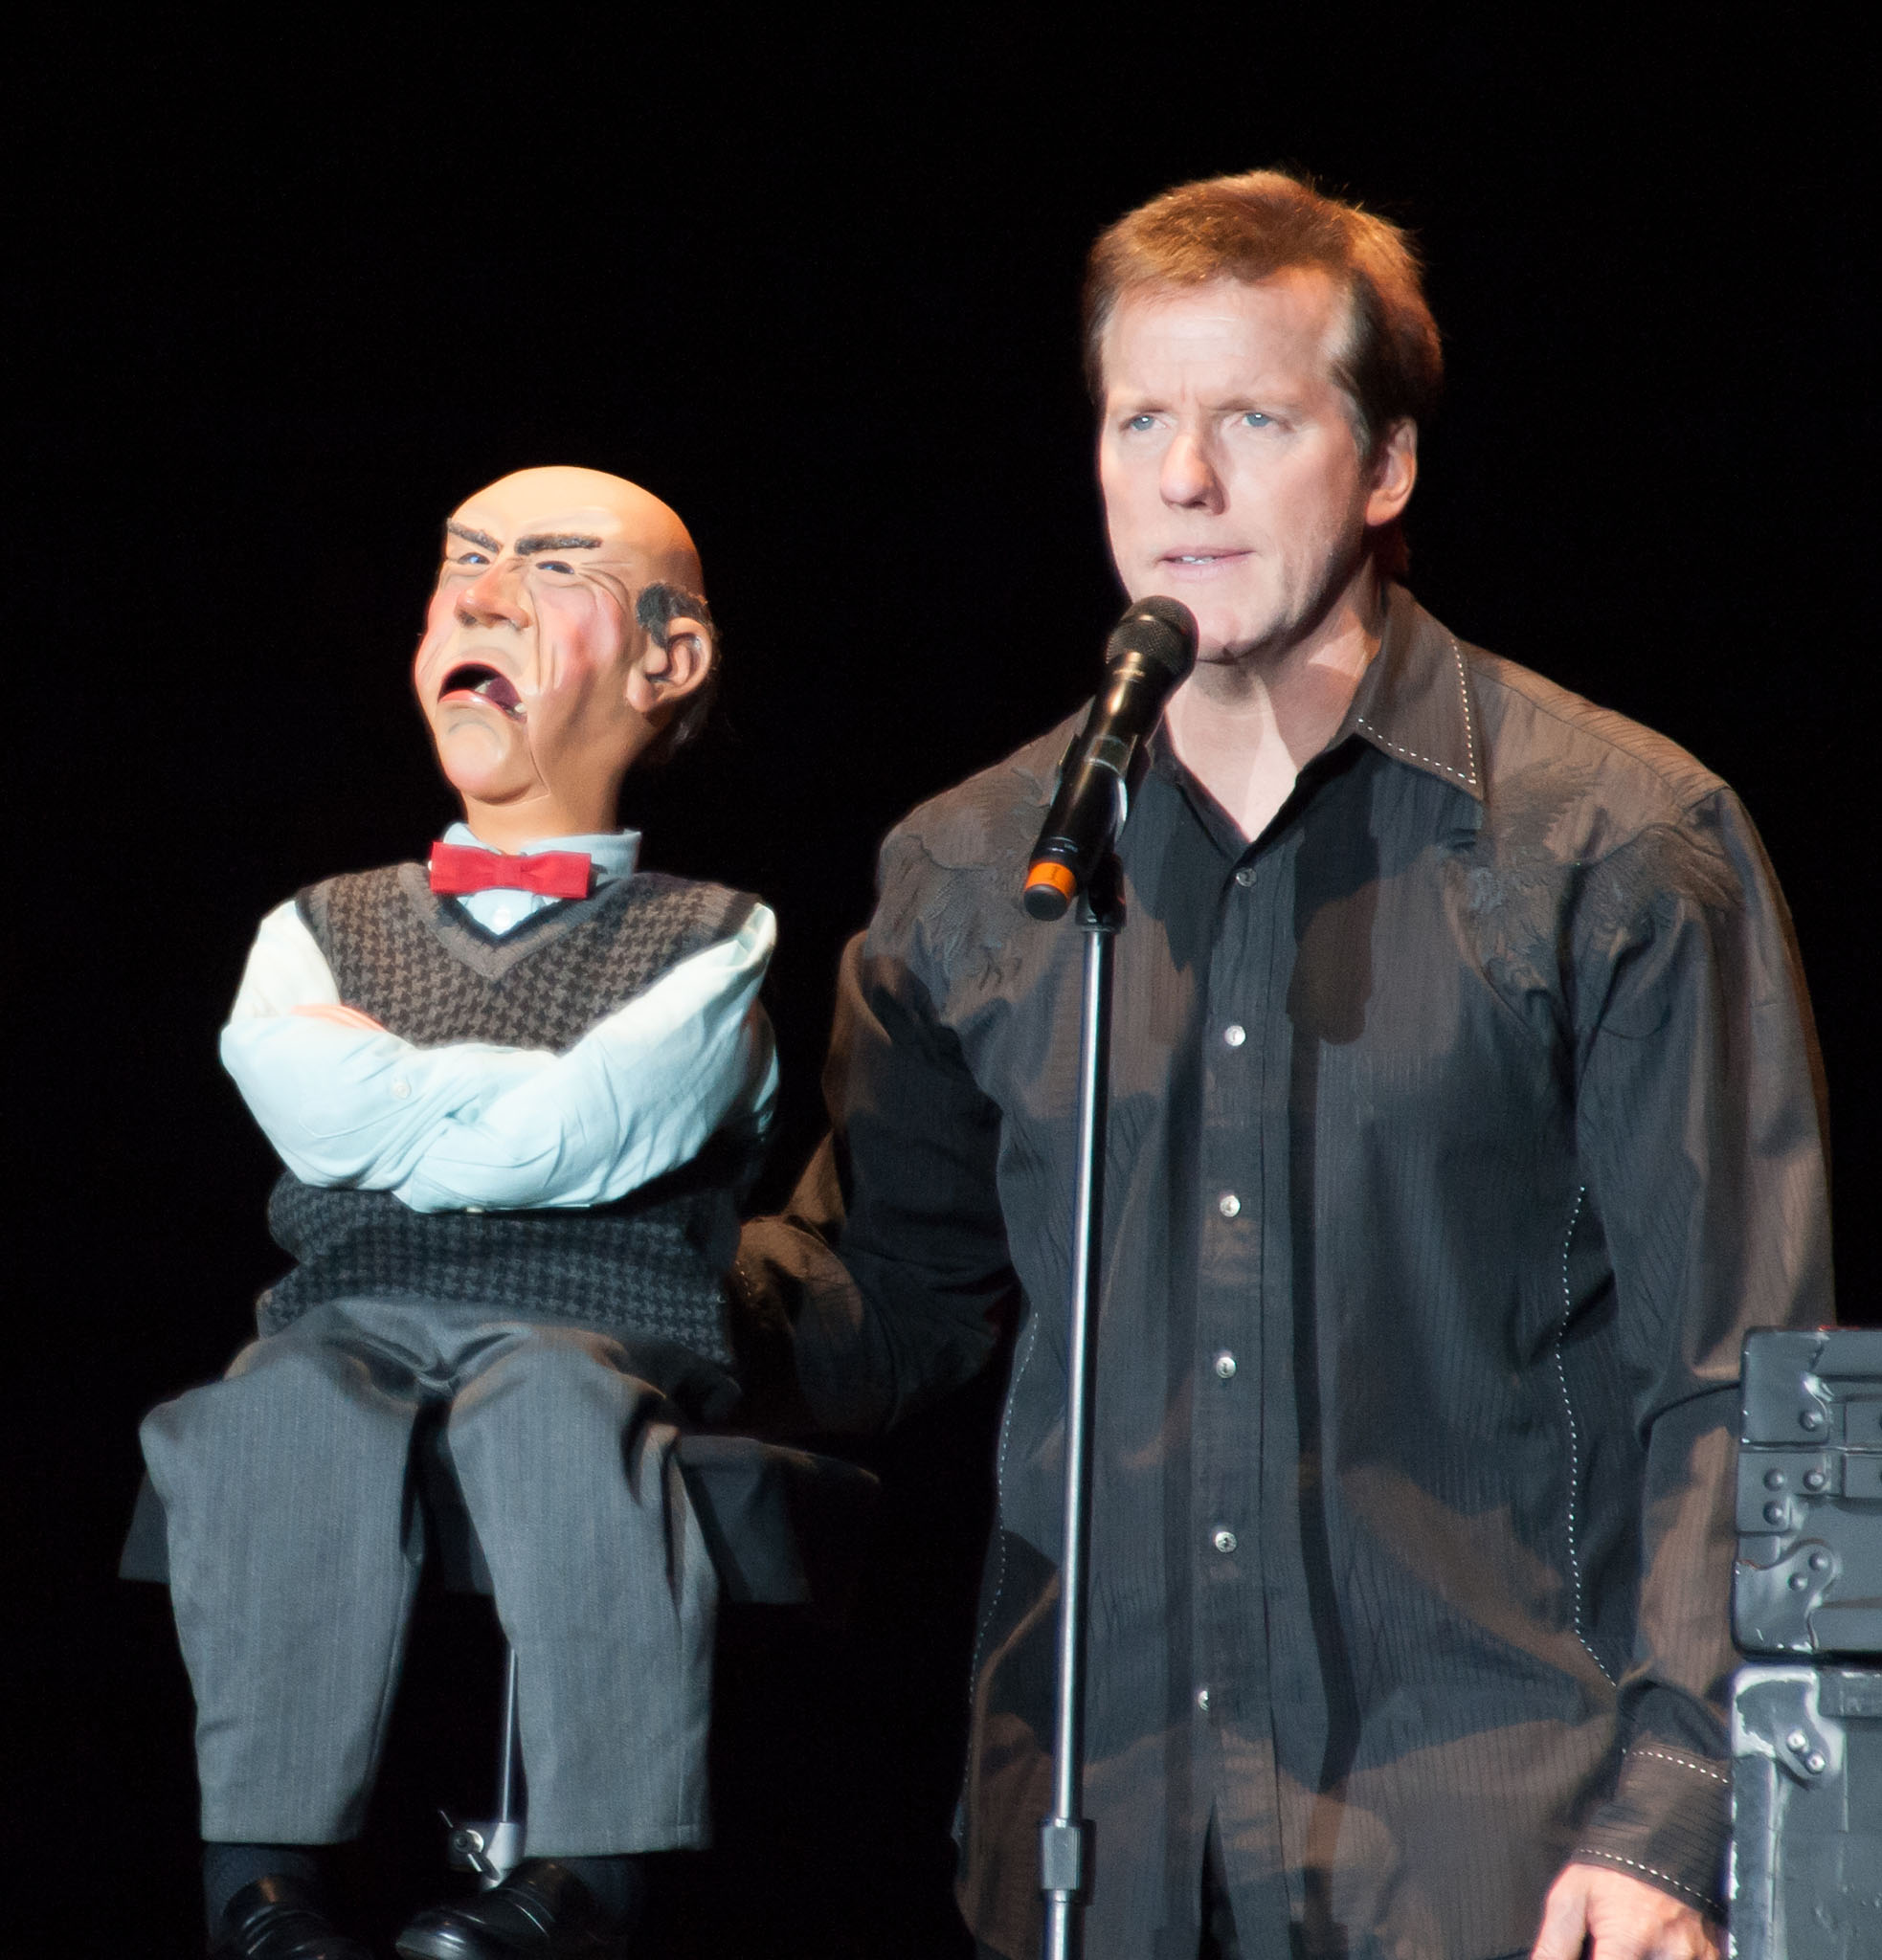 Ventriloquist and standup comedian Jeff Dunham achieved the Guinness Book of World Record for "Most tickets sold for a stand-up comedy tour" for his Spark of Insanity tour in 2014